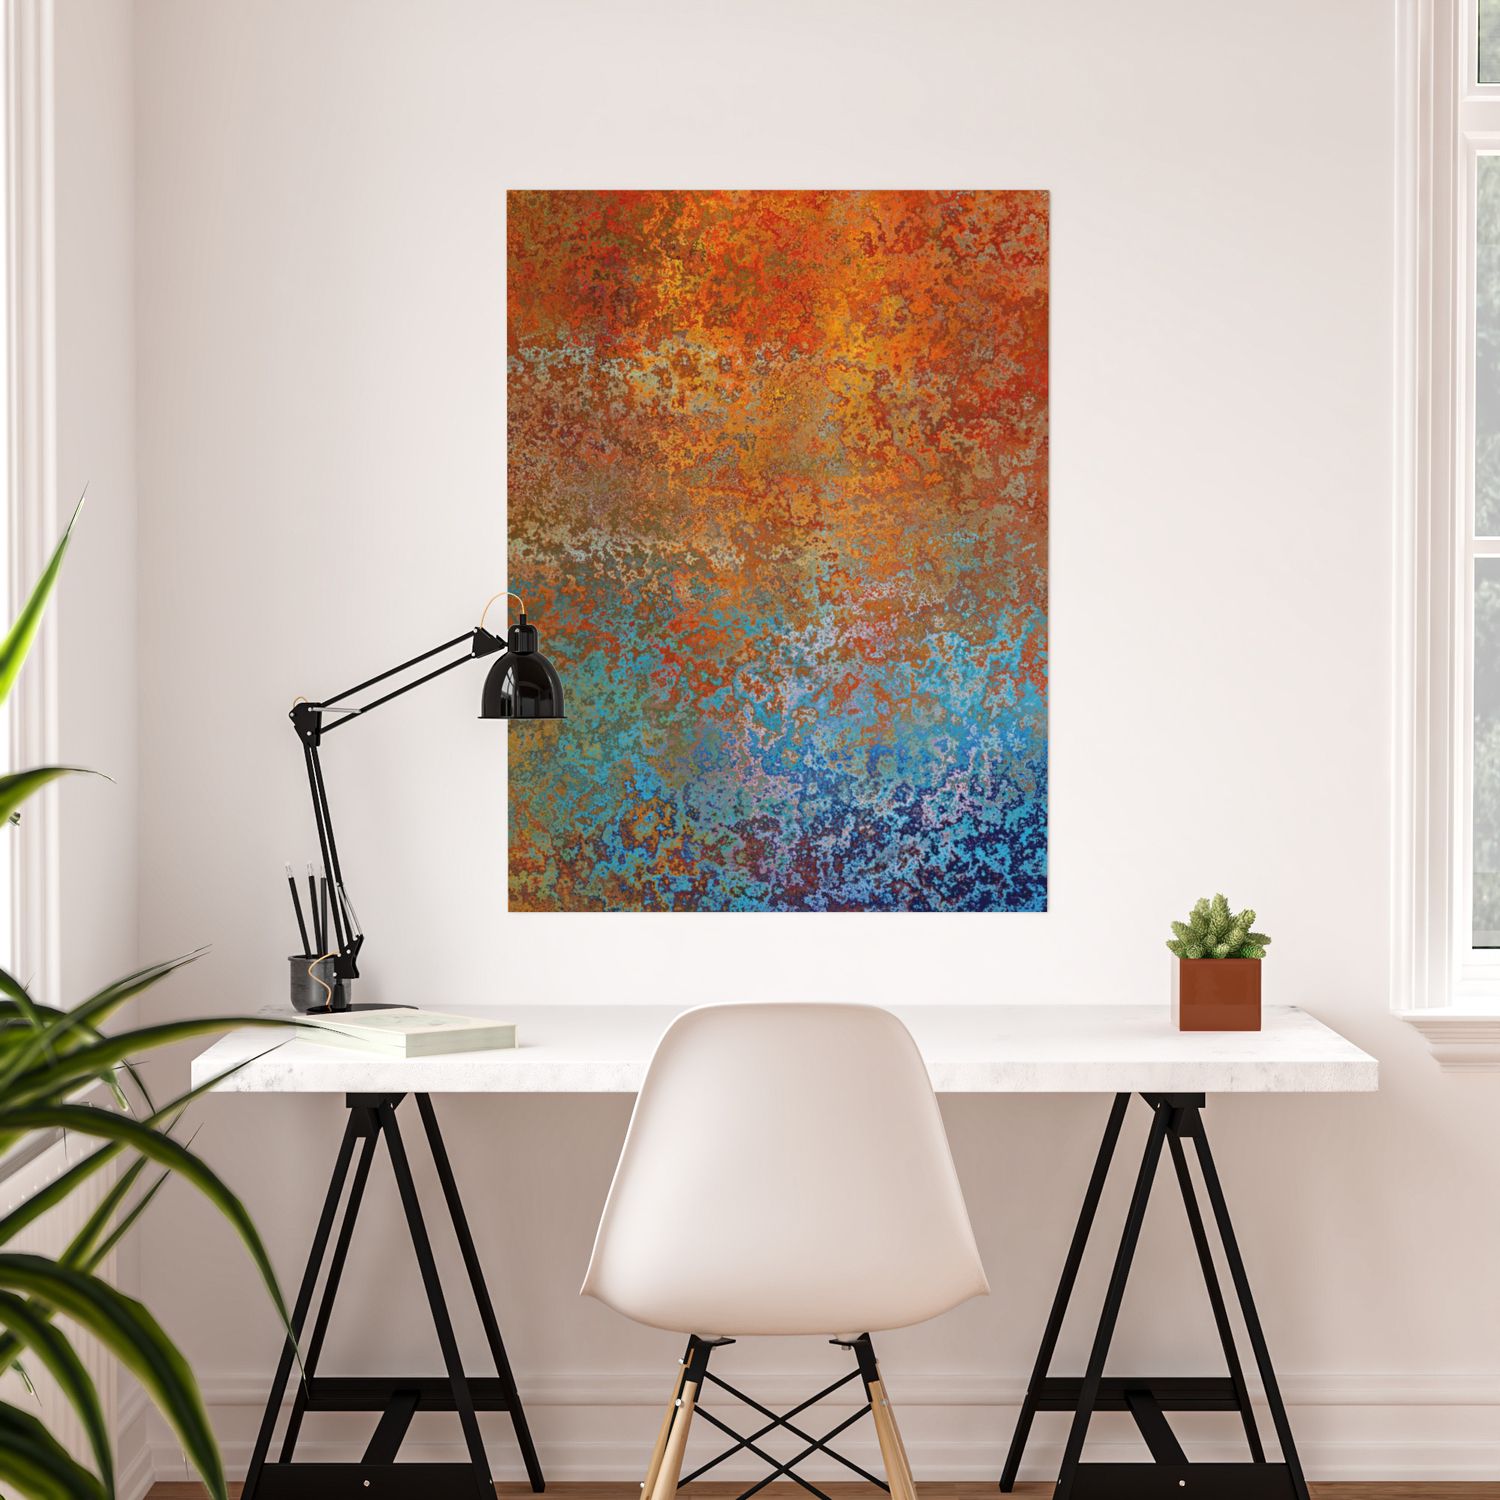 Vintage Rust, Terracotta And Blue Postermegan Morris | Society6 Throughout Best And Newest Vintage Rust Wall Art (View 12 of 20)